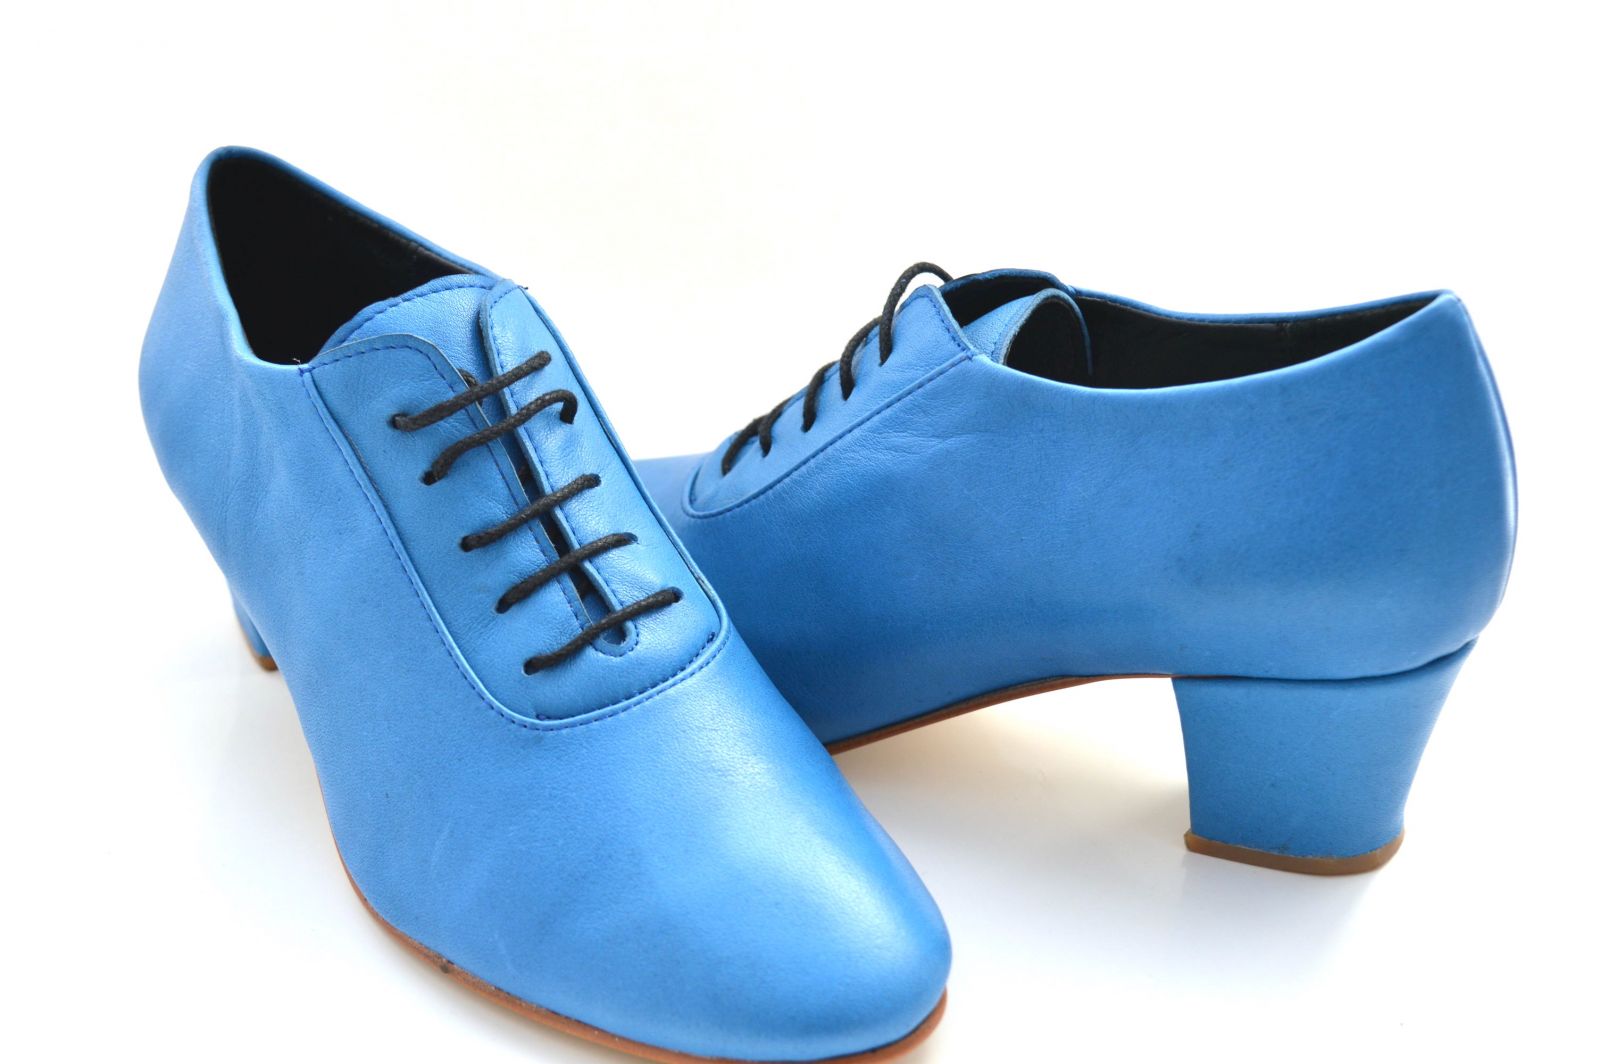 Women's Argentine Tango Shoe, oxford style, by very soft blue leather